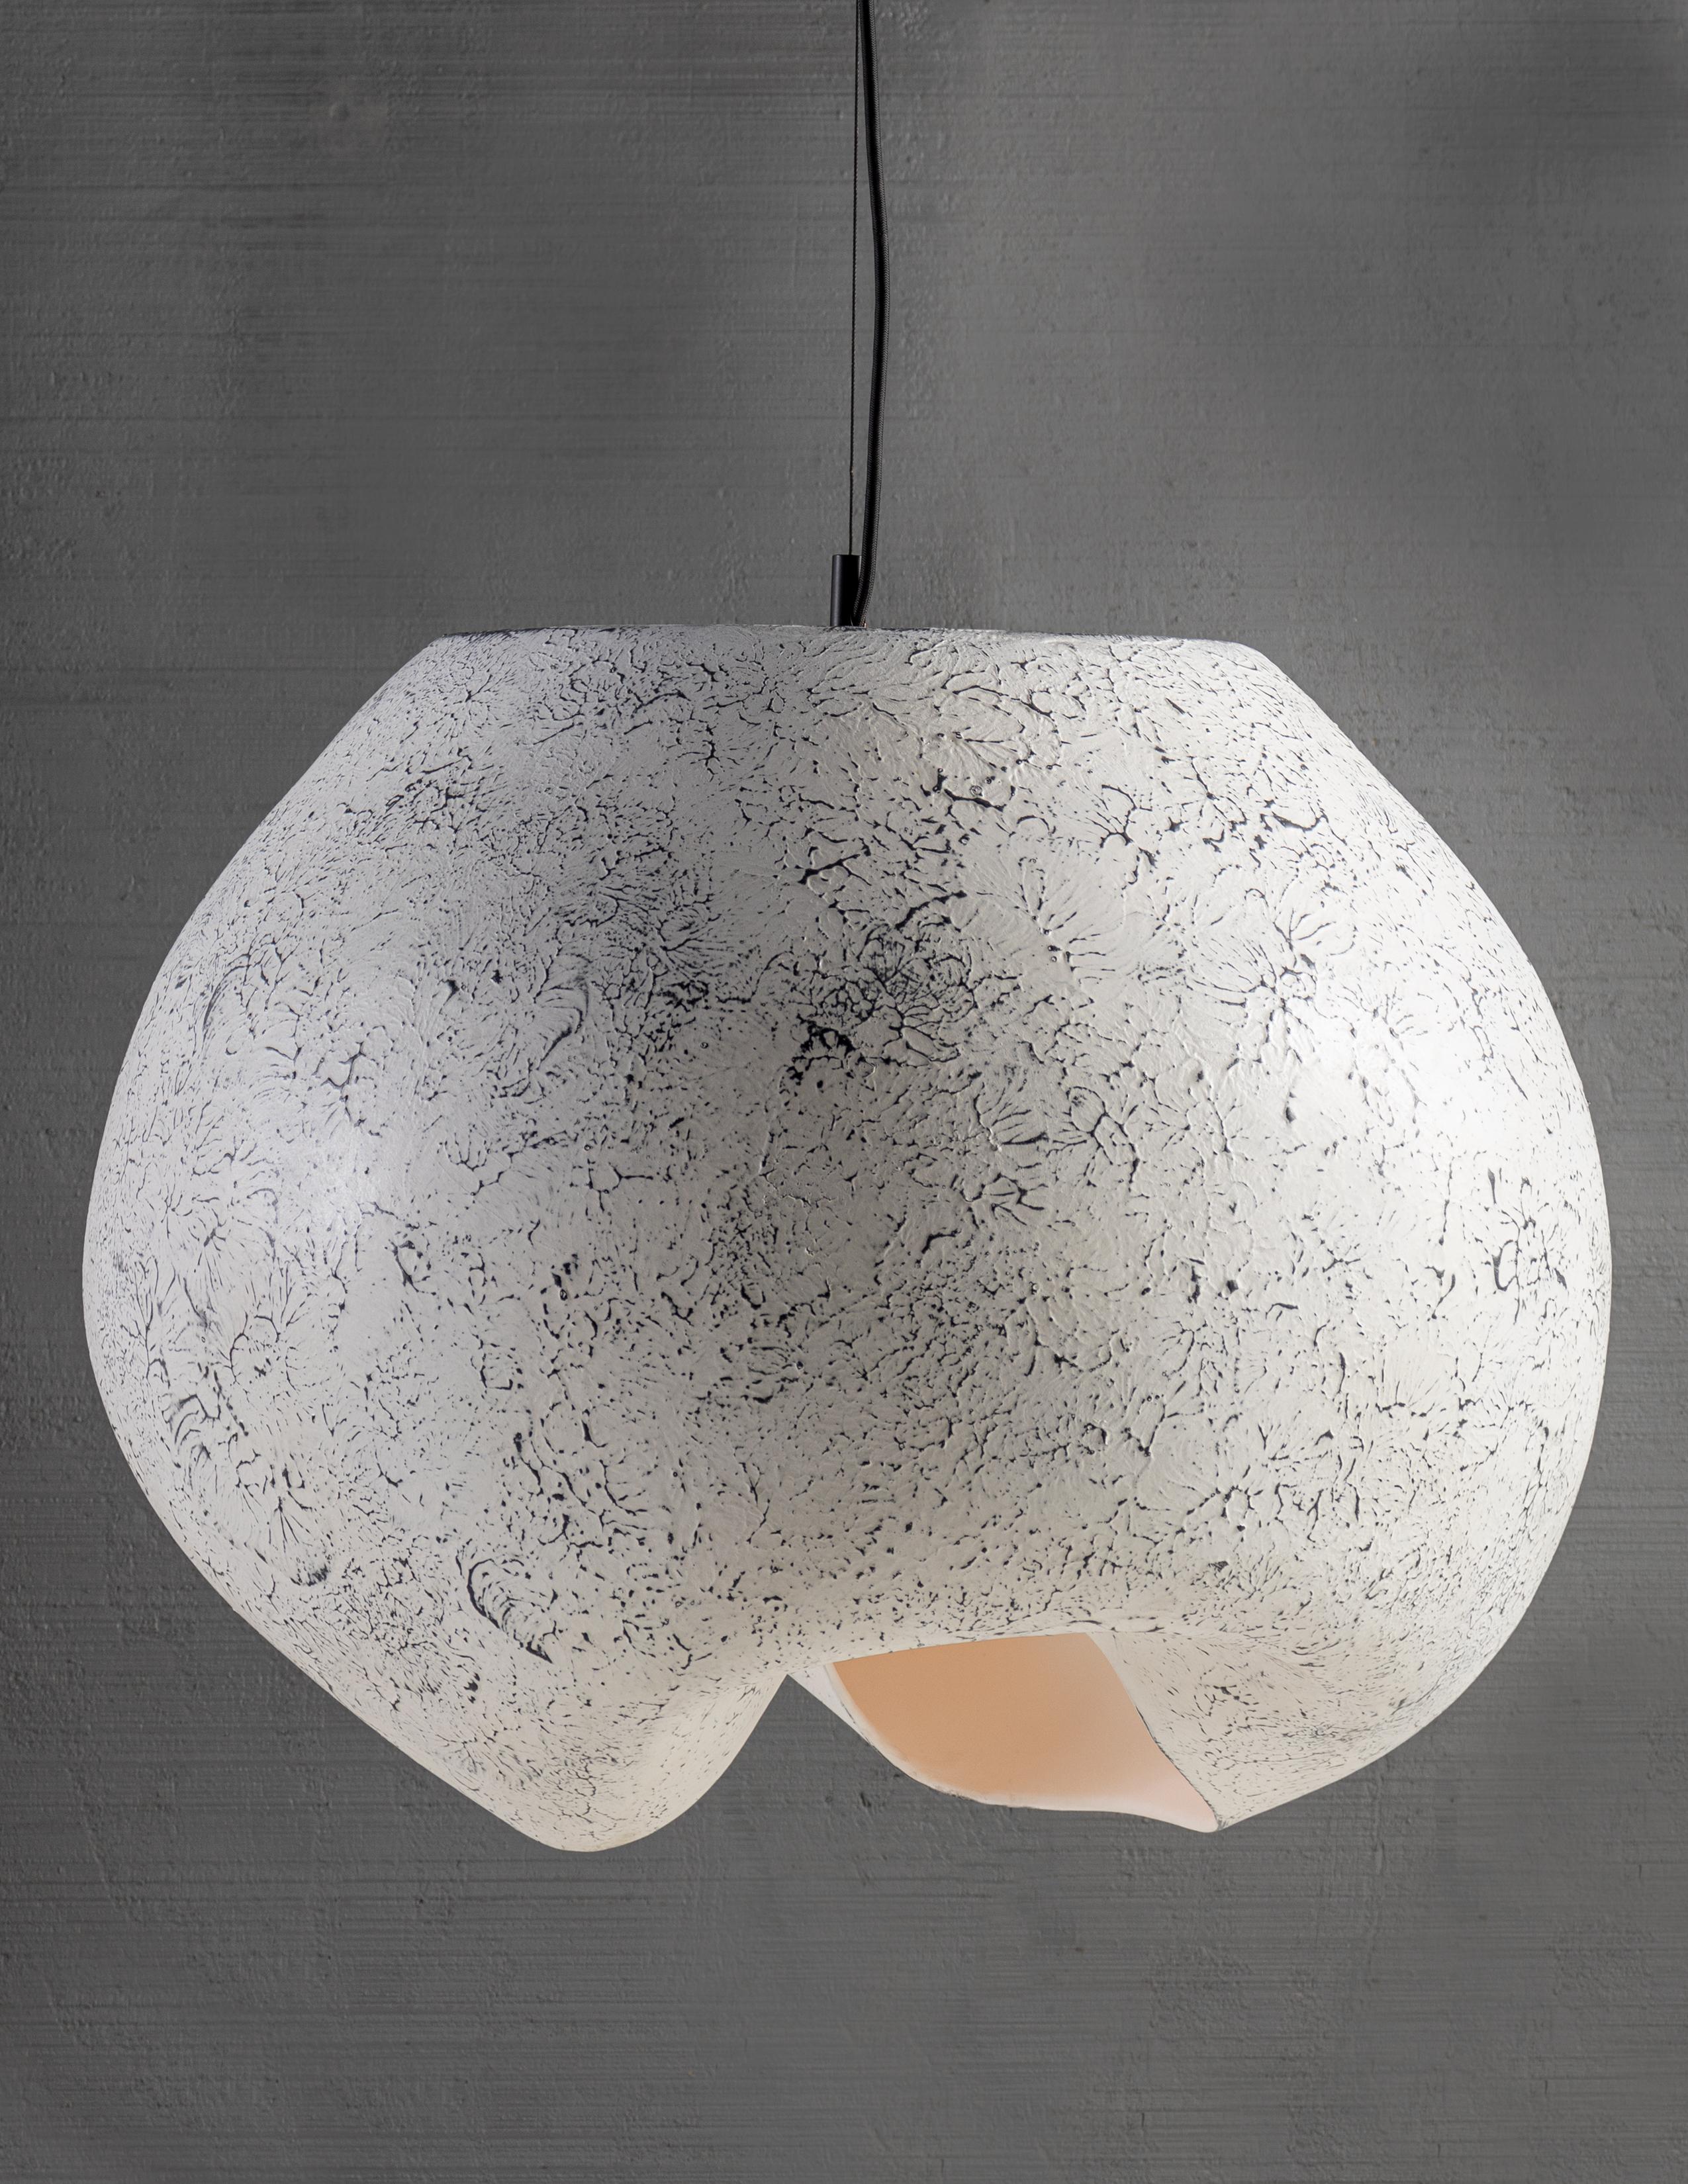 Hand formed ceramic

Bulb 1x medium base 100 watt incandescent.

The cloud pendant is formed from a large spherical mould then gently hand worked to create undulations implying motion levitation. Crafted by artisan in Northern Italy, Cloud reflects